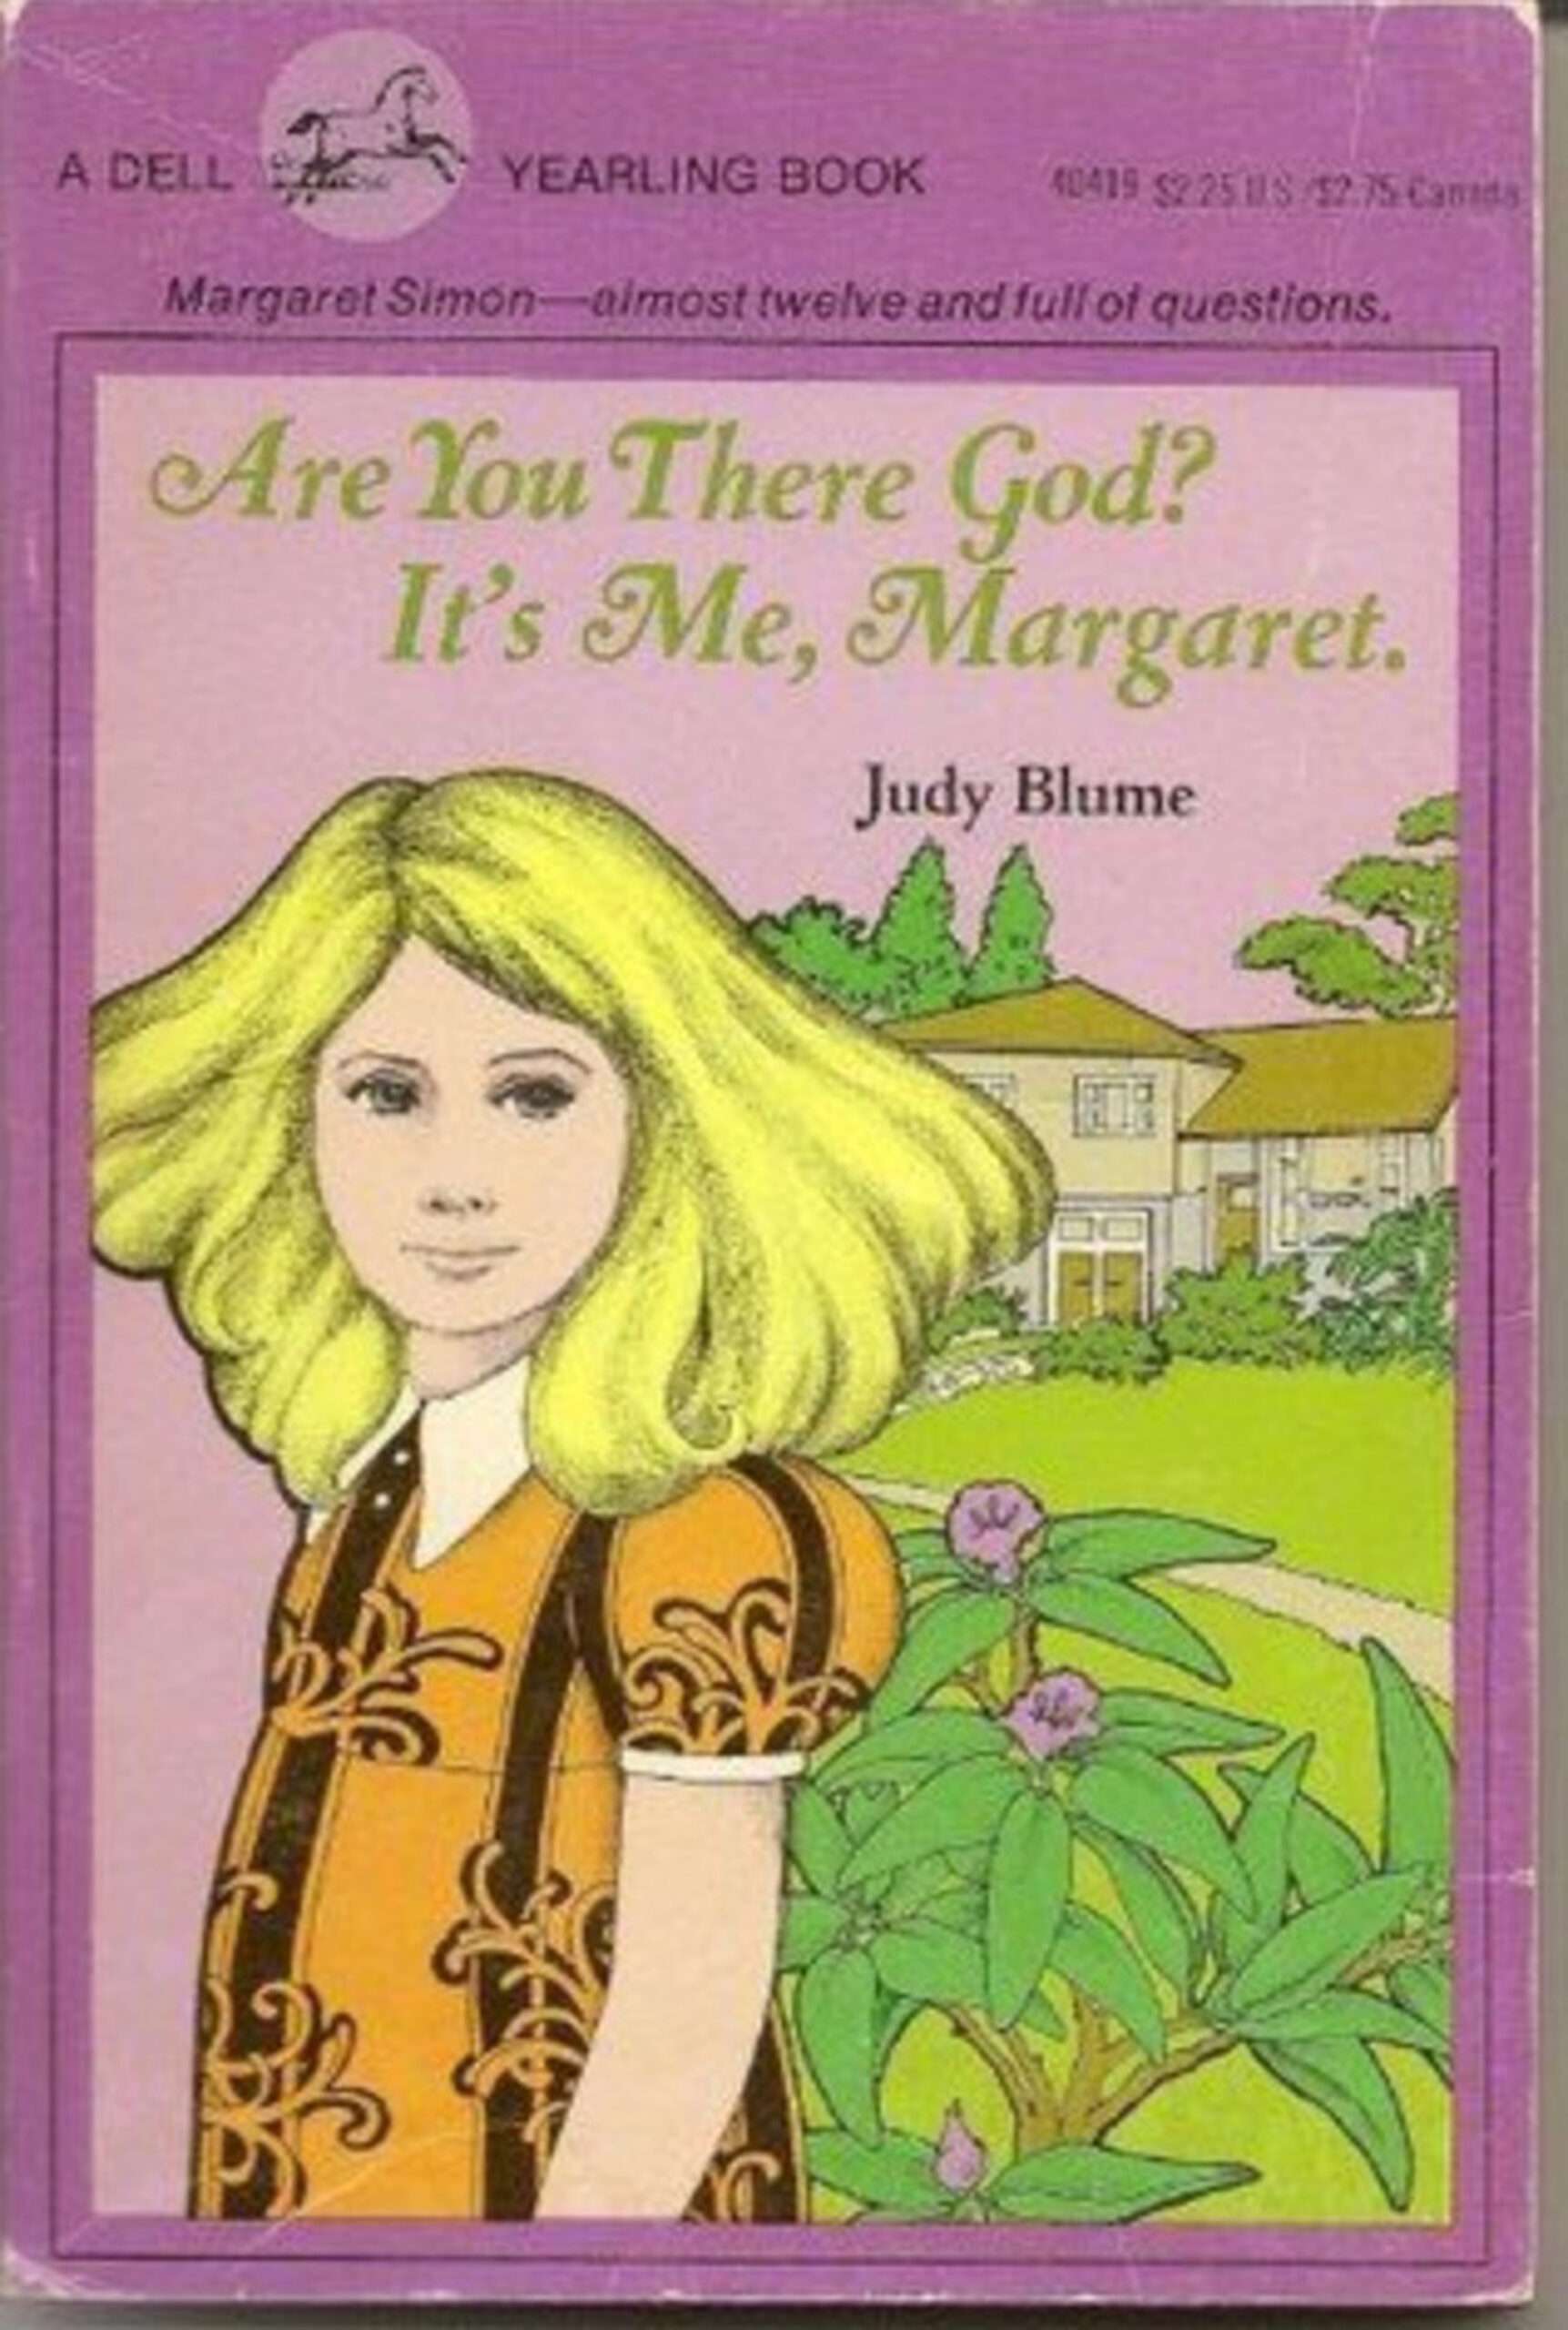 'Are You There God? It's Me, Margaret' 1970s book cover 